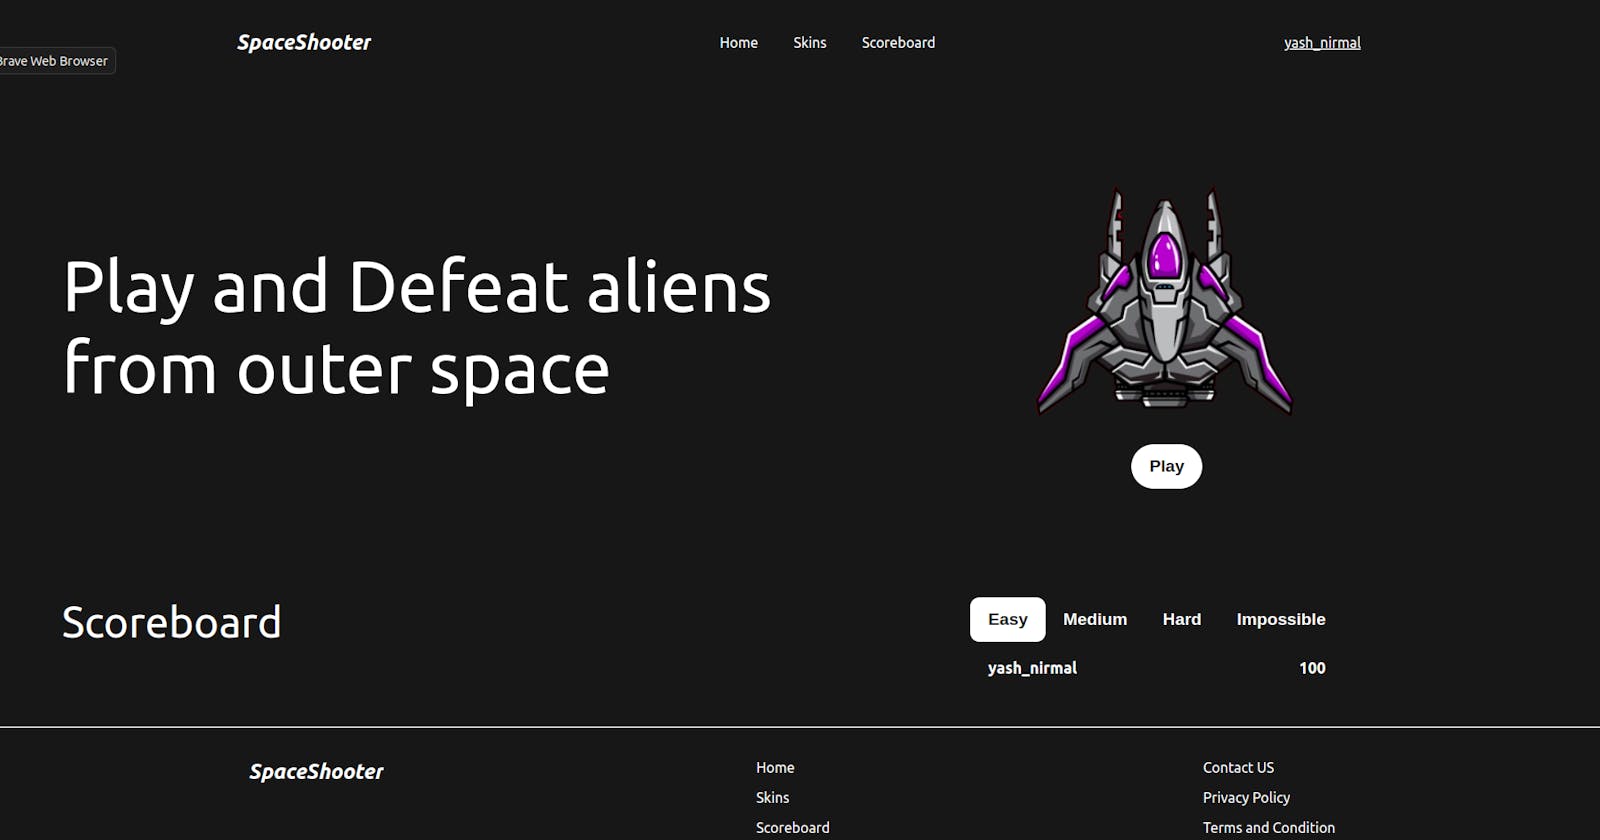 How I built a Space Shooter Game using only HTML and Javascript?